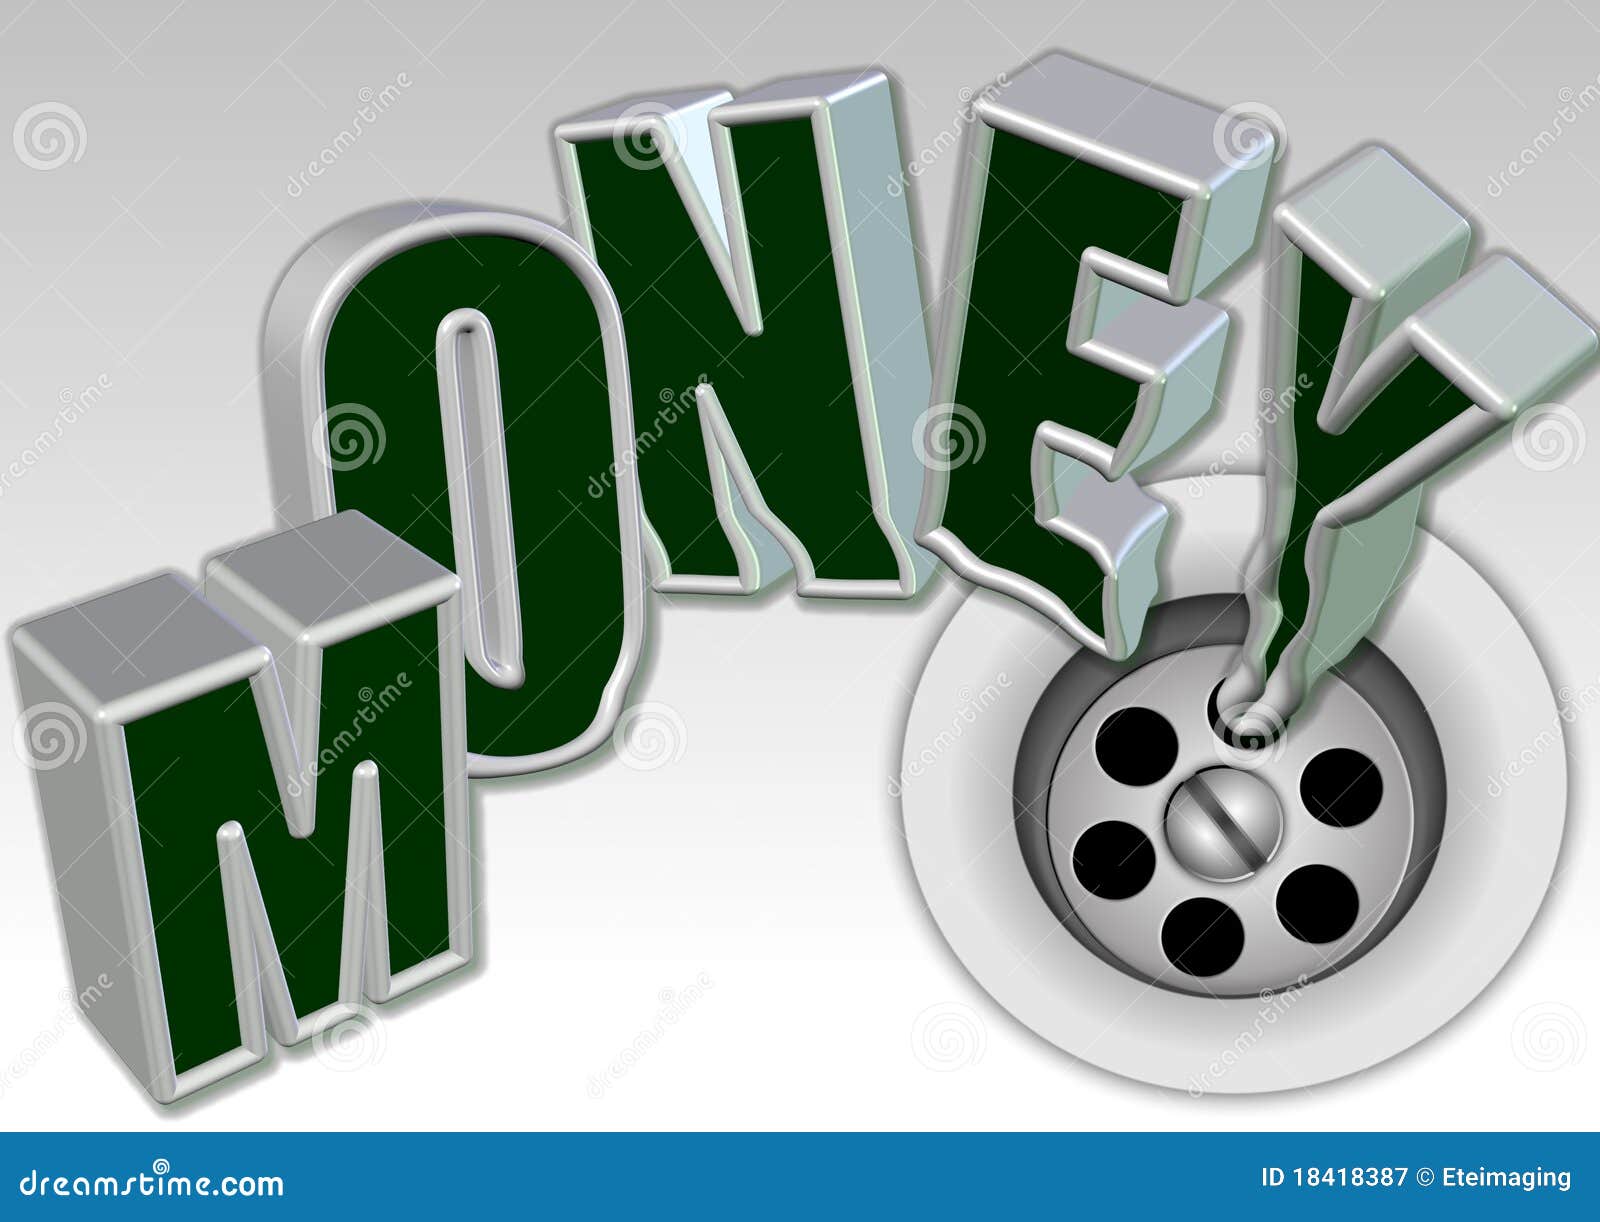 clipart of money going down the drain - photo #15